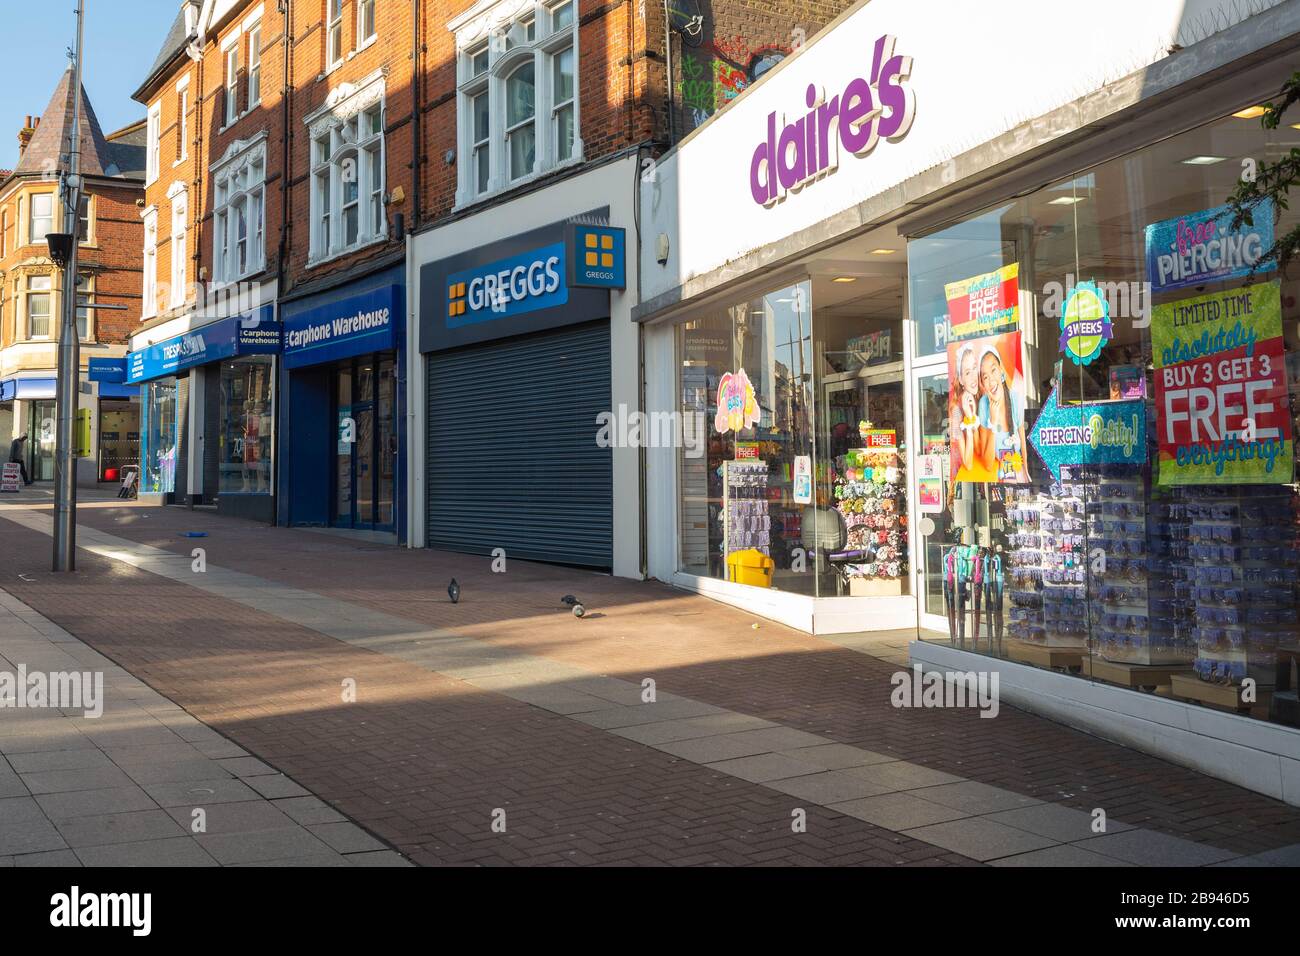 Southend-on-Sea, UK. 23rd Mar, 2020. Many shops on the High Street in the Essex town of Southend-on-Sea have already pulled down the shutters and closed for the foreseeable future. Some shops remain open for business as well. Penelope Barritt/Alamy Live News Stock Photo